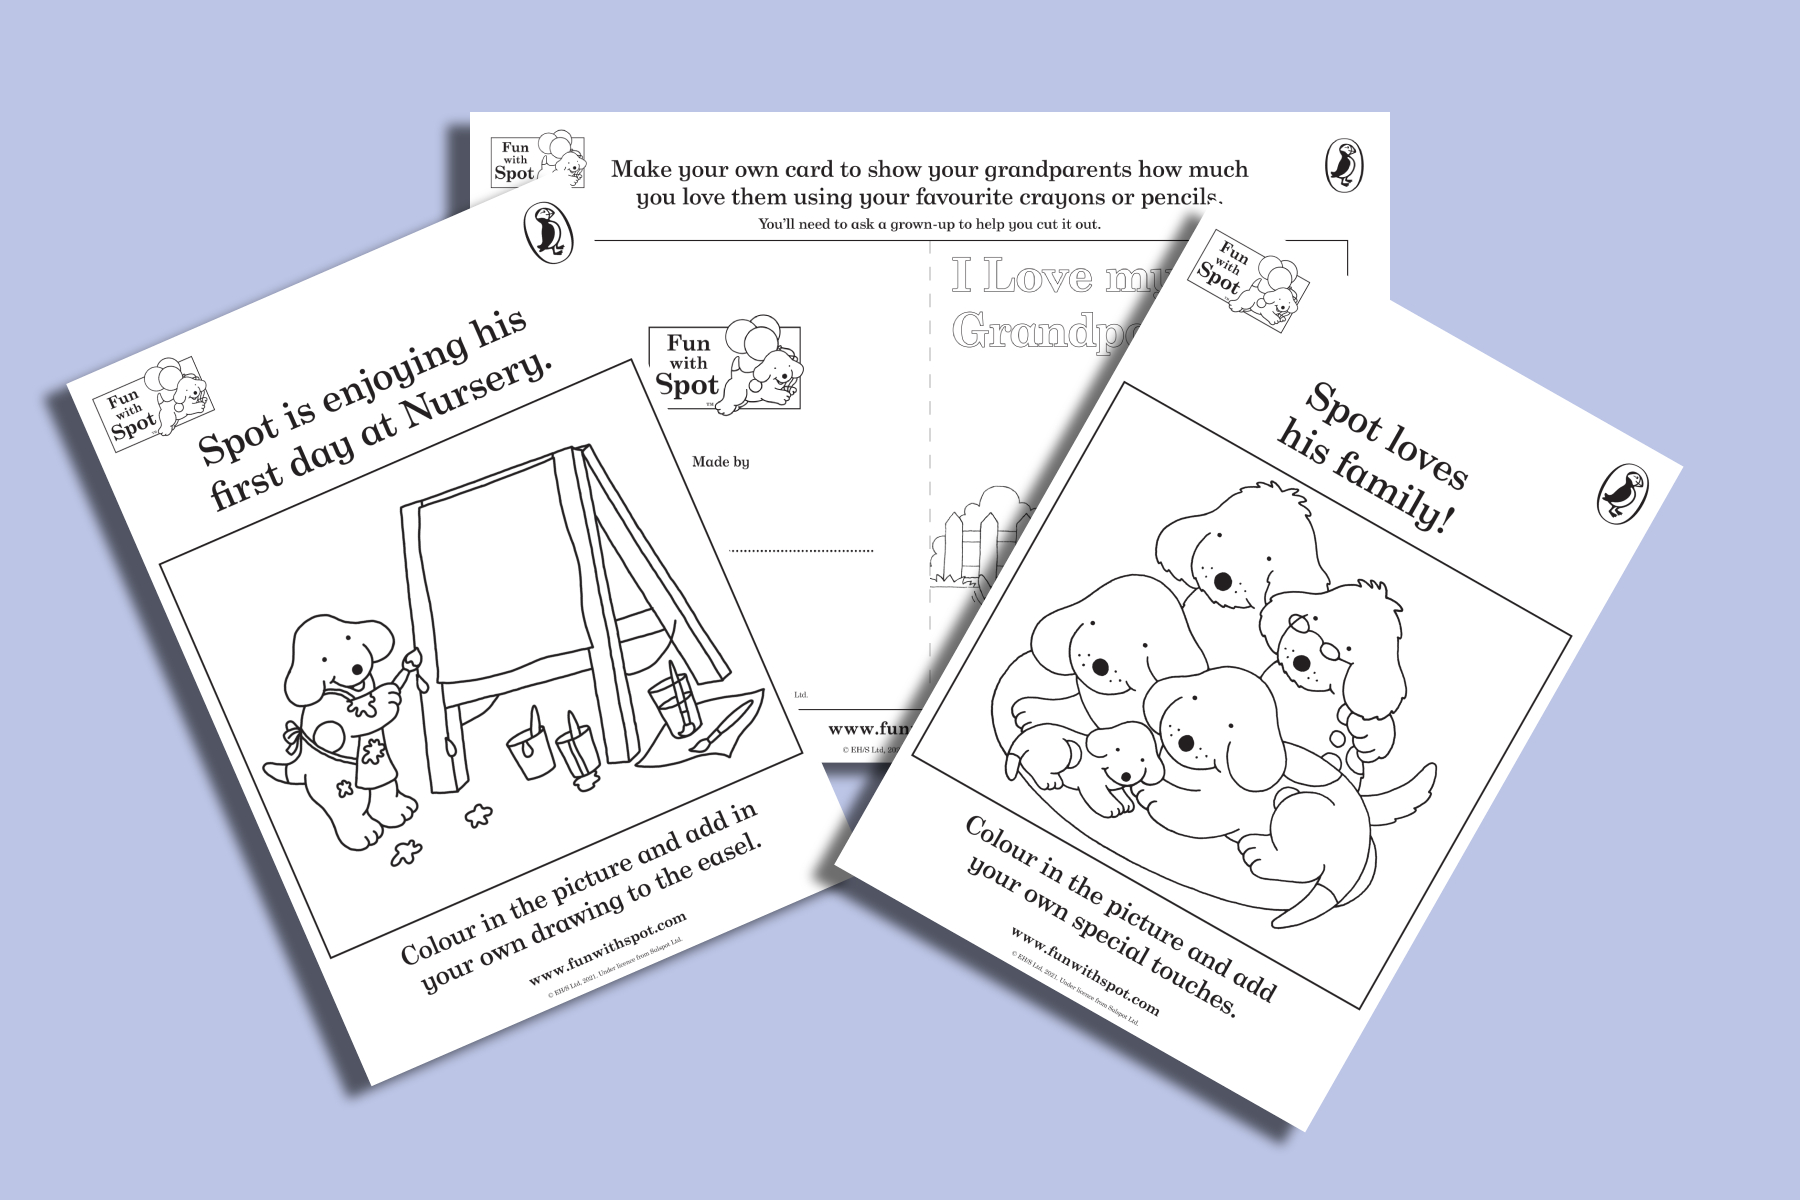 A photo of three Spot the dog activity sheets, side by side, on a periwinkle coloured background